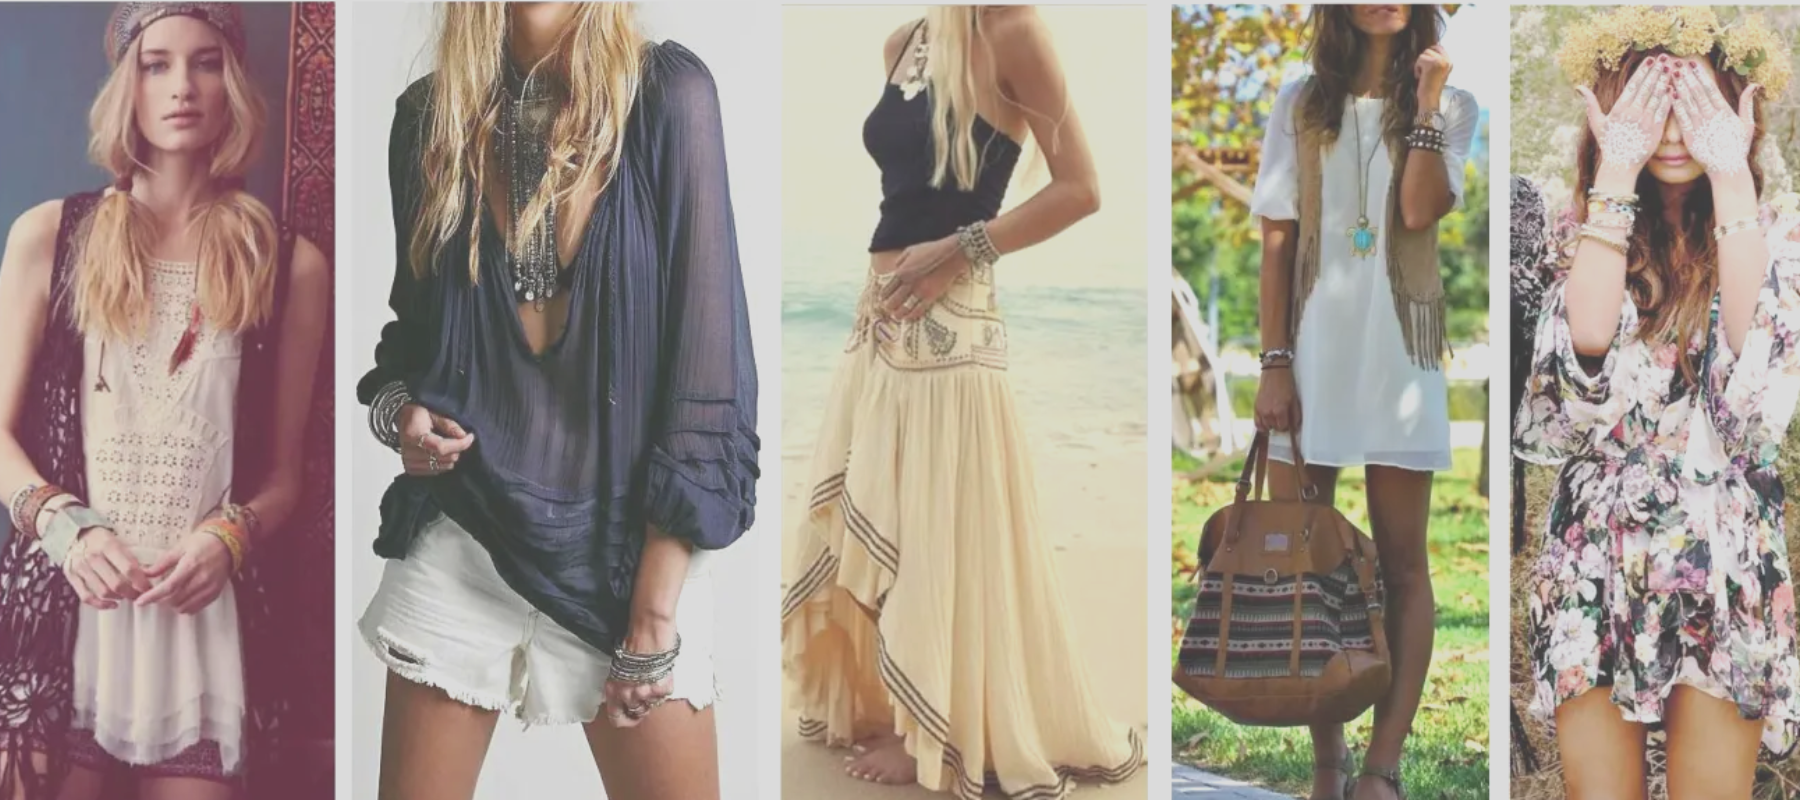 The Art of Layering: How to Achieve a Boho Look